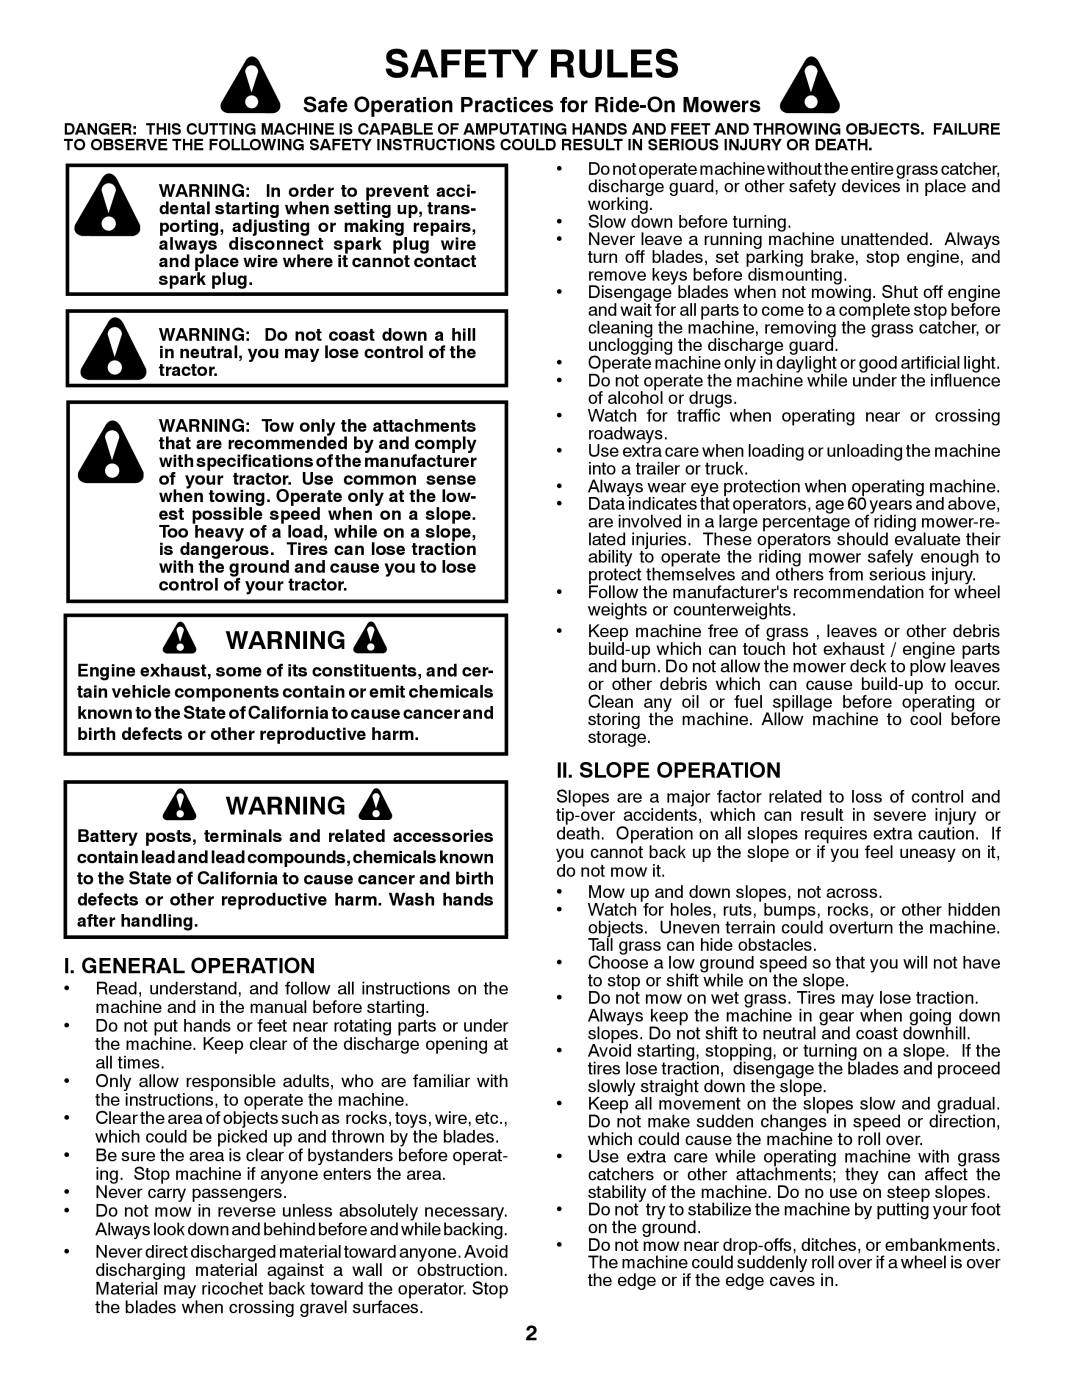 Poulan 96012008600 Safety Rules, Safe Operation Practices for Ride-OnMowers, I. General Operation, Ii. Slope Operation 